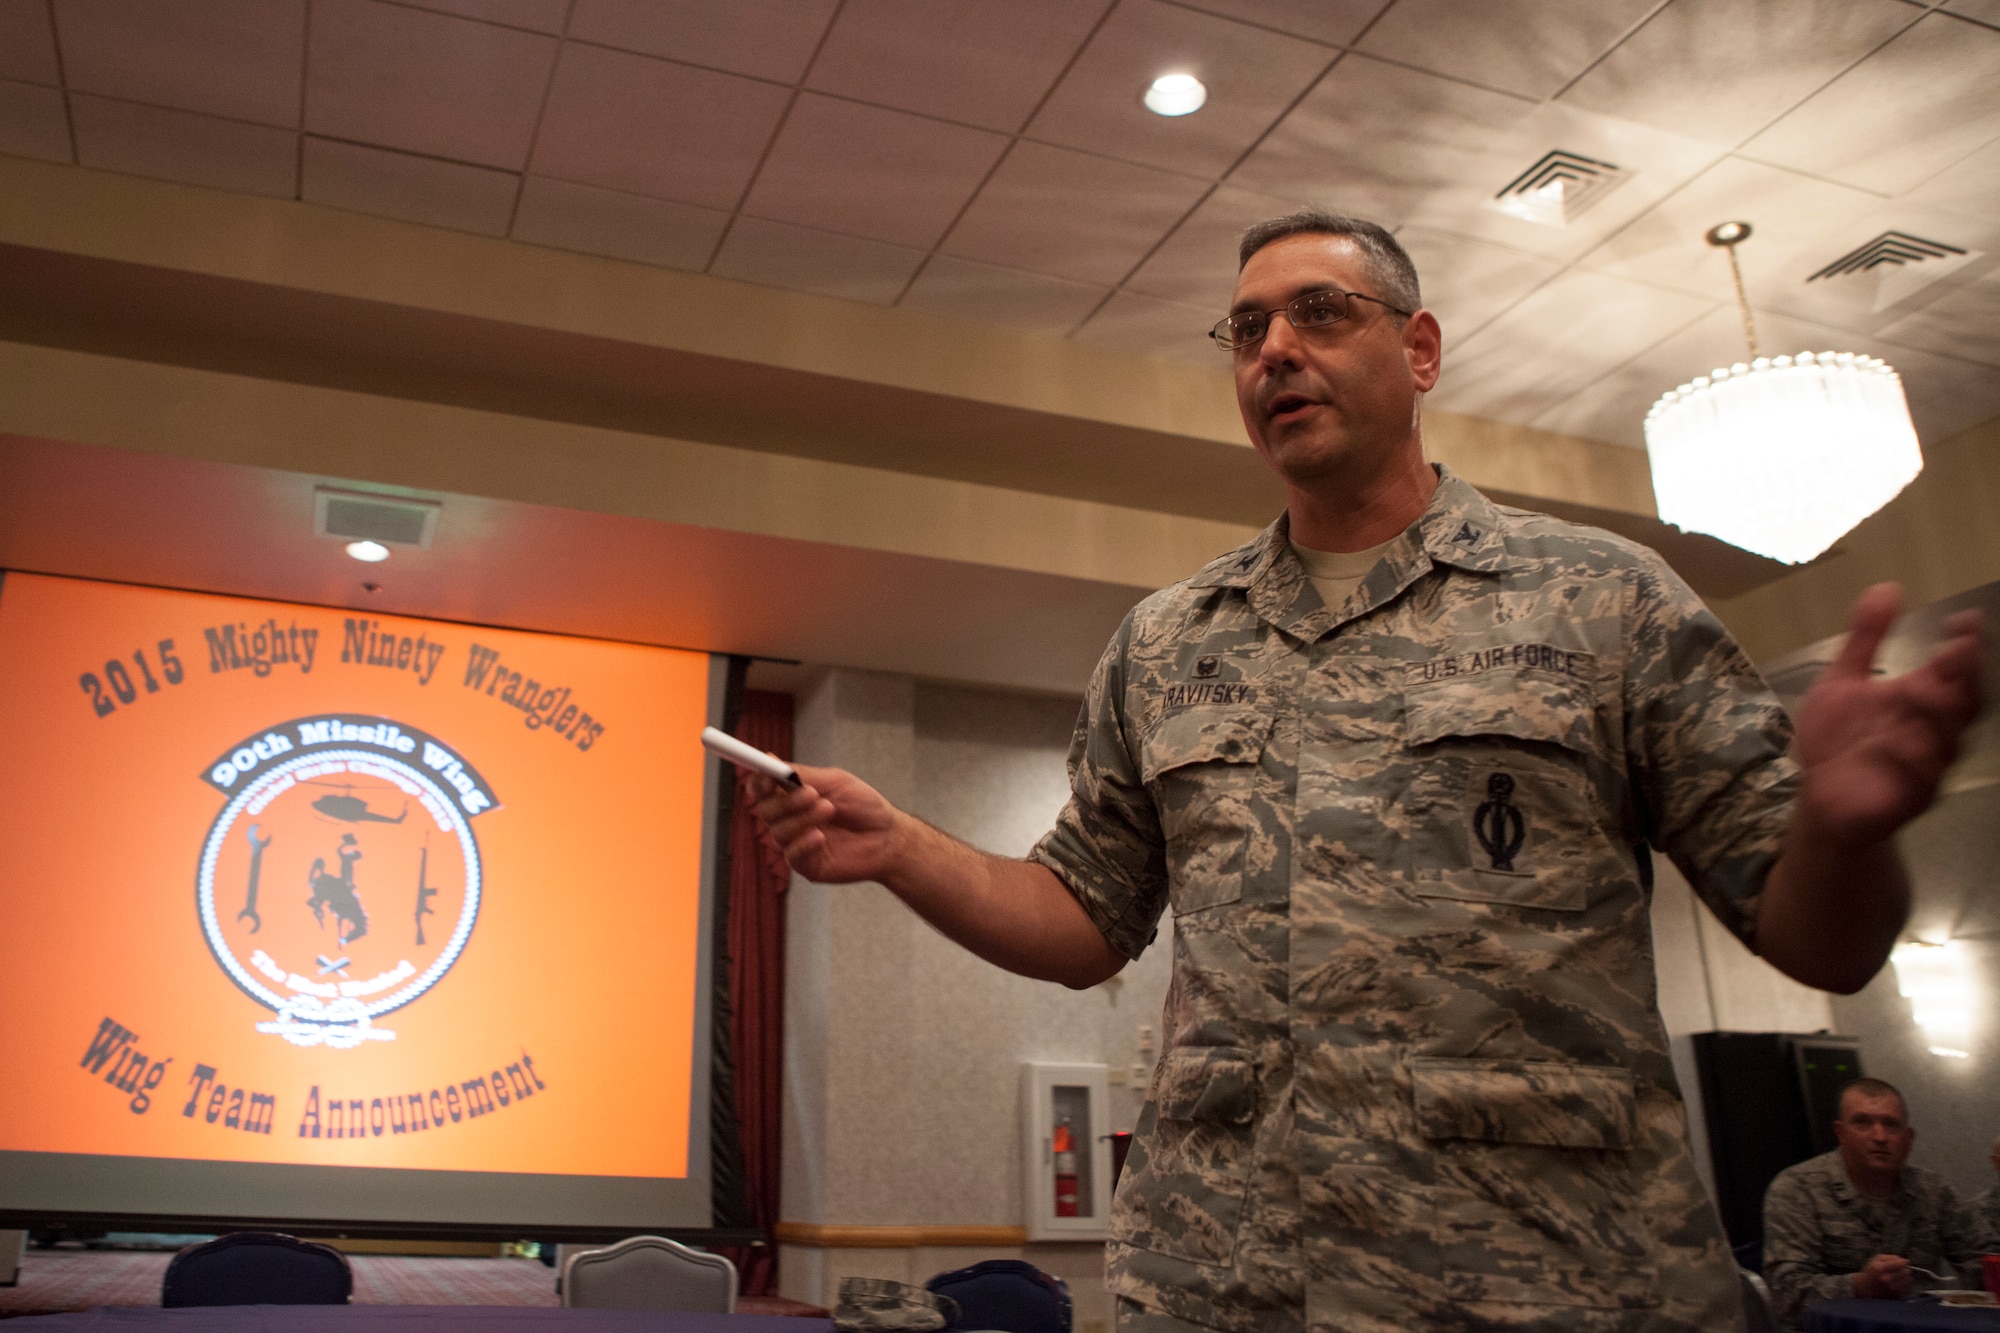 Col. Stephen Kravitsky, 90th Missile Wing commander, gives a speech to the Warren's Global Strike Challenge competitors during the announcement event at the Trail's End Event Center on F.E. Warren Air Force Base, Wyo., July 31, 2015. This is the fifth annual GSC. (U.S. Air Force photo by Lan Kim)